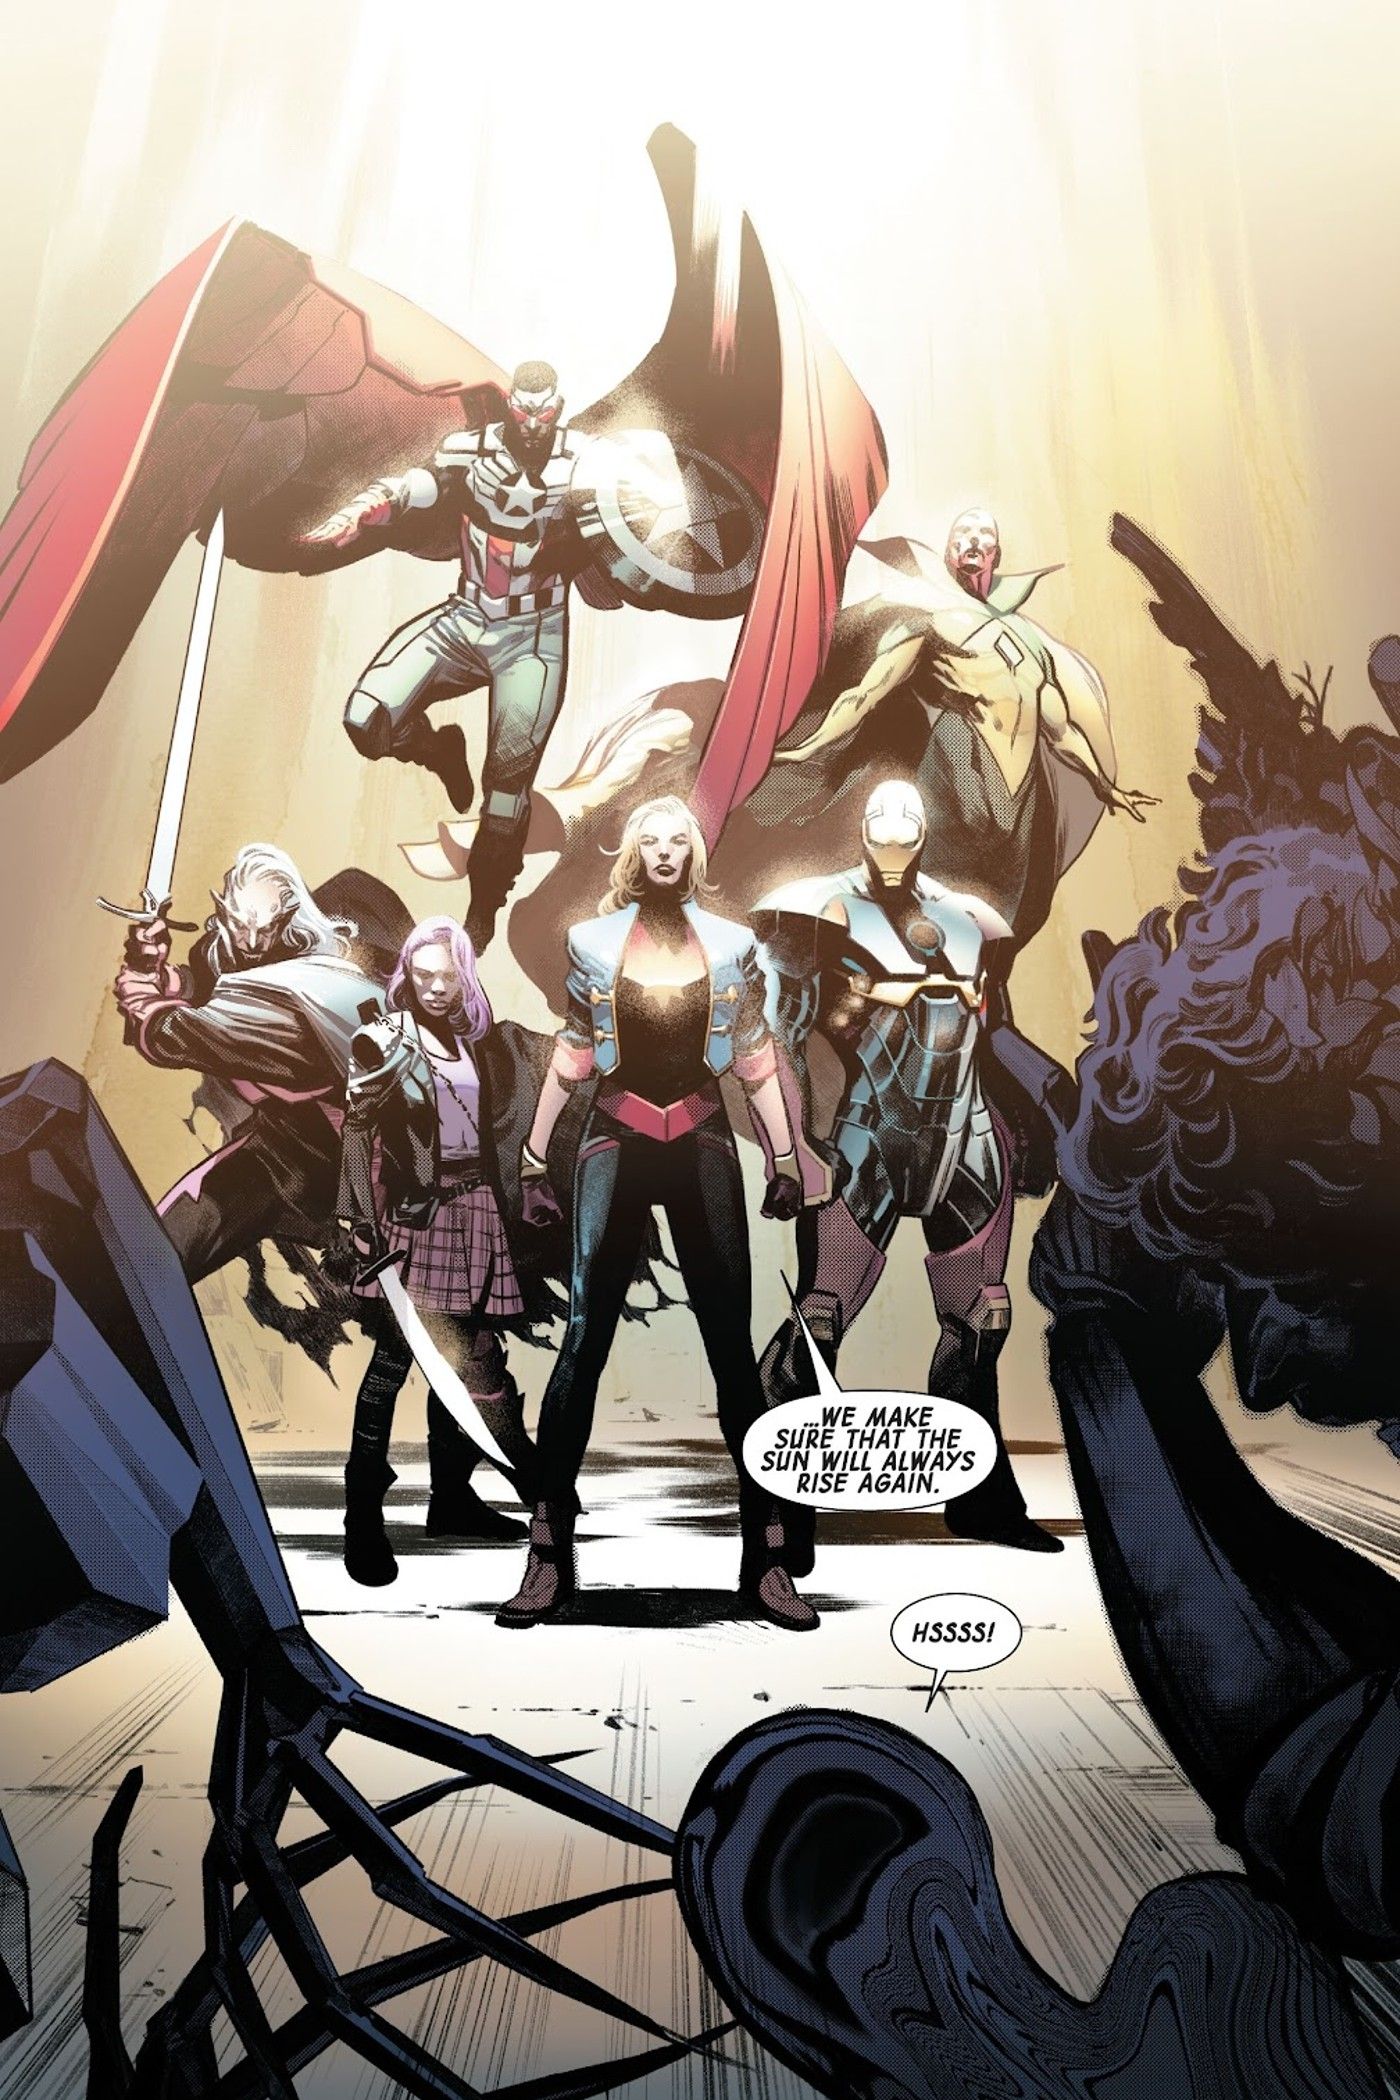 Dracula and Blade's daughter Bloodline stand tall with the Avengers Iron Man Captain Marvel Captain America and Vision to fight vampires